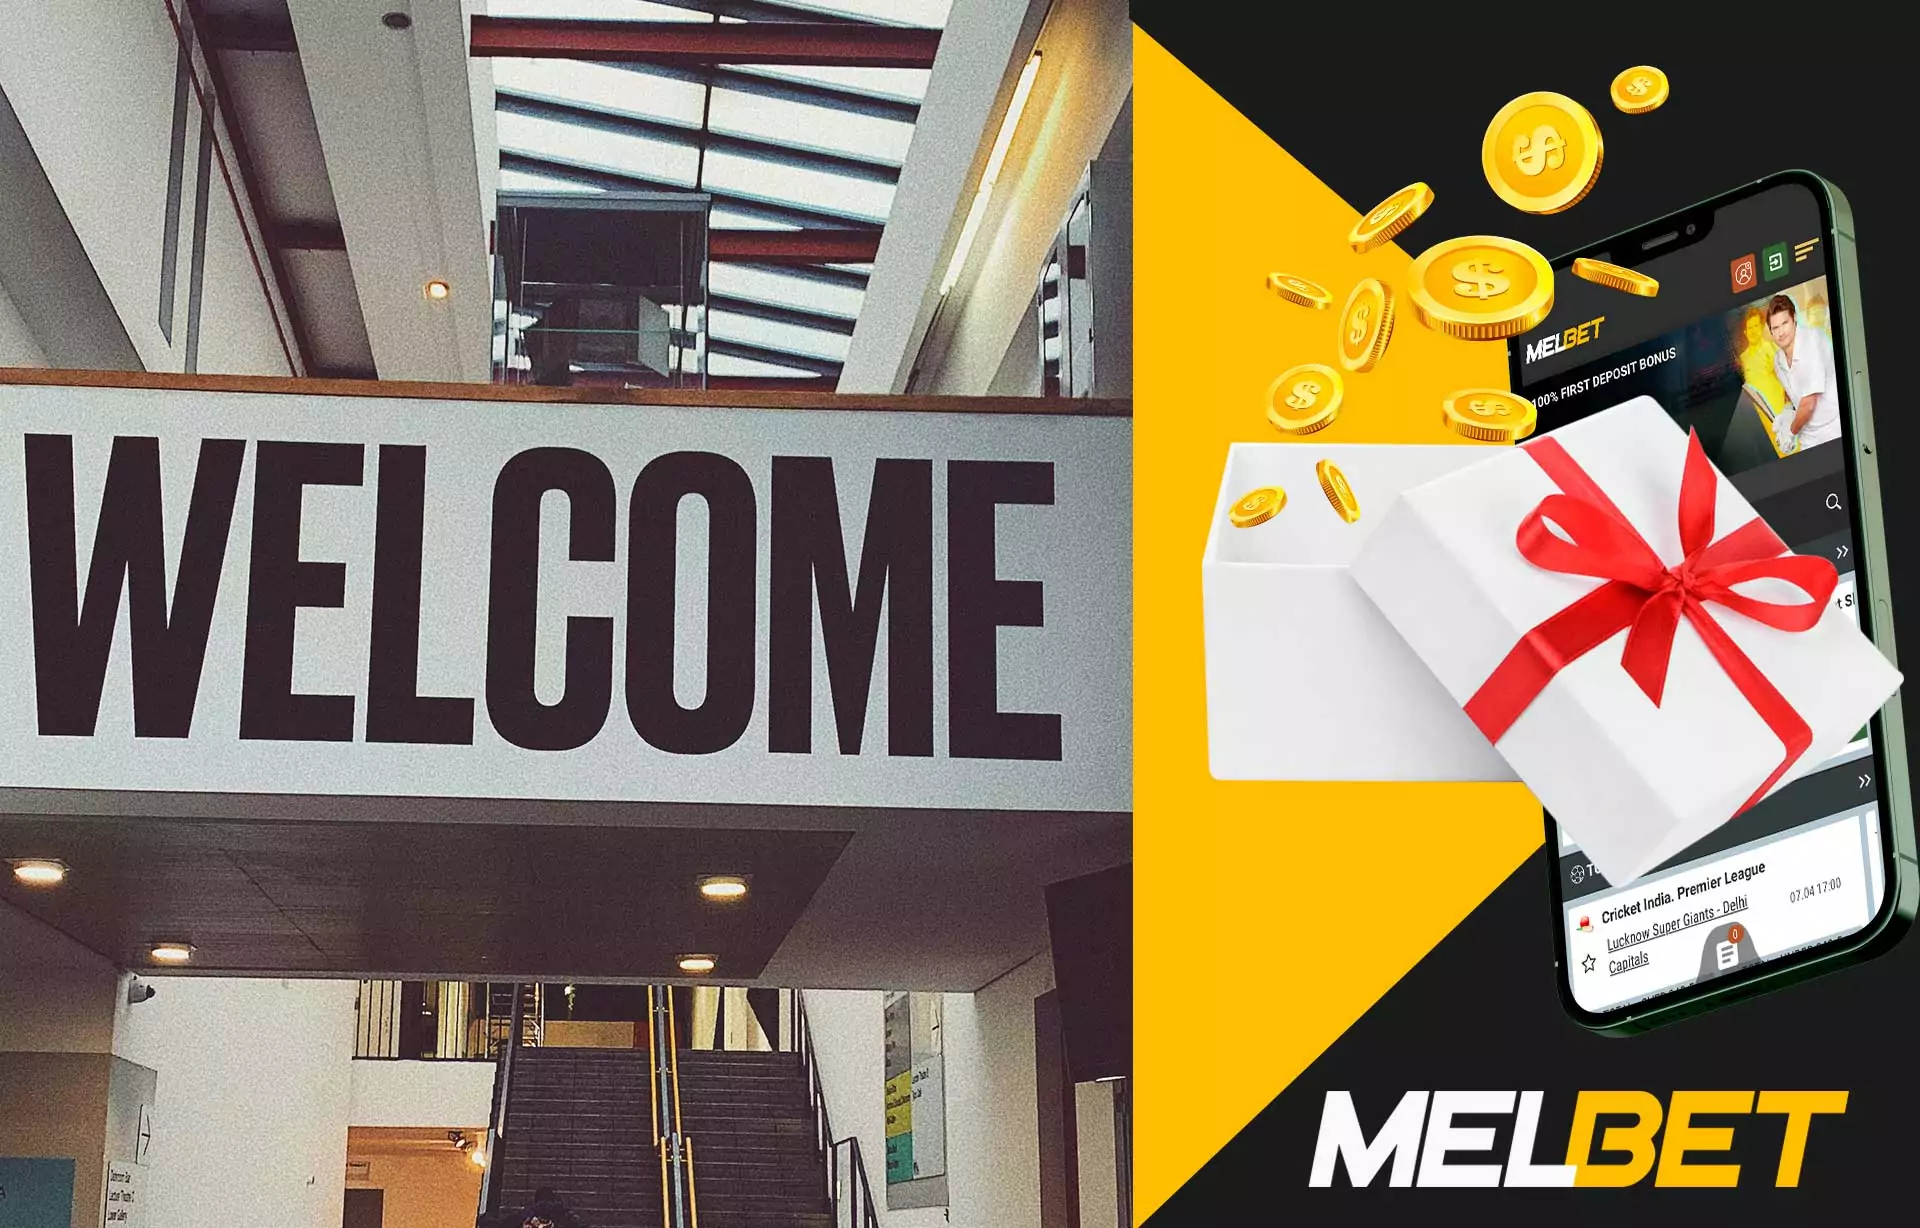 All new players receive a first deposit bonus in Melbet.